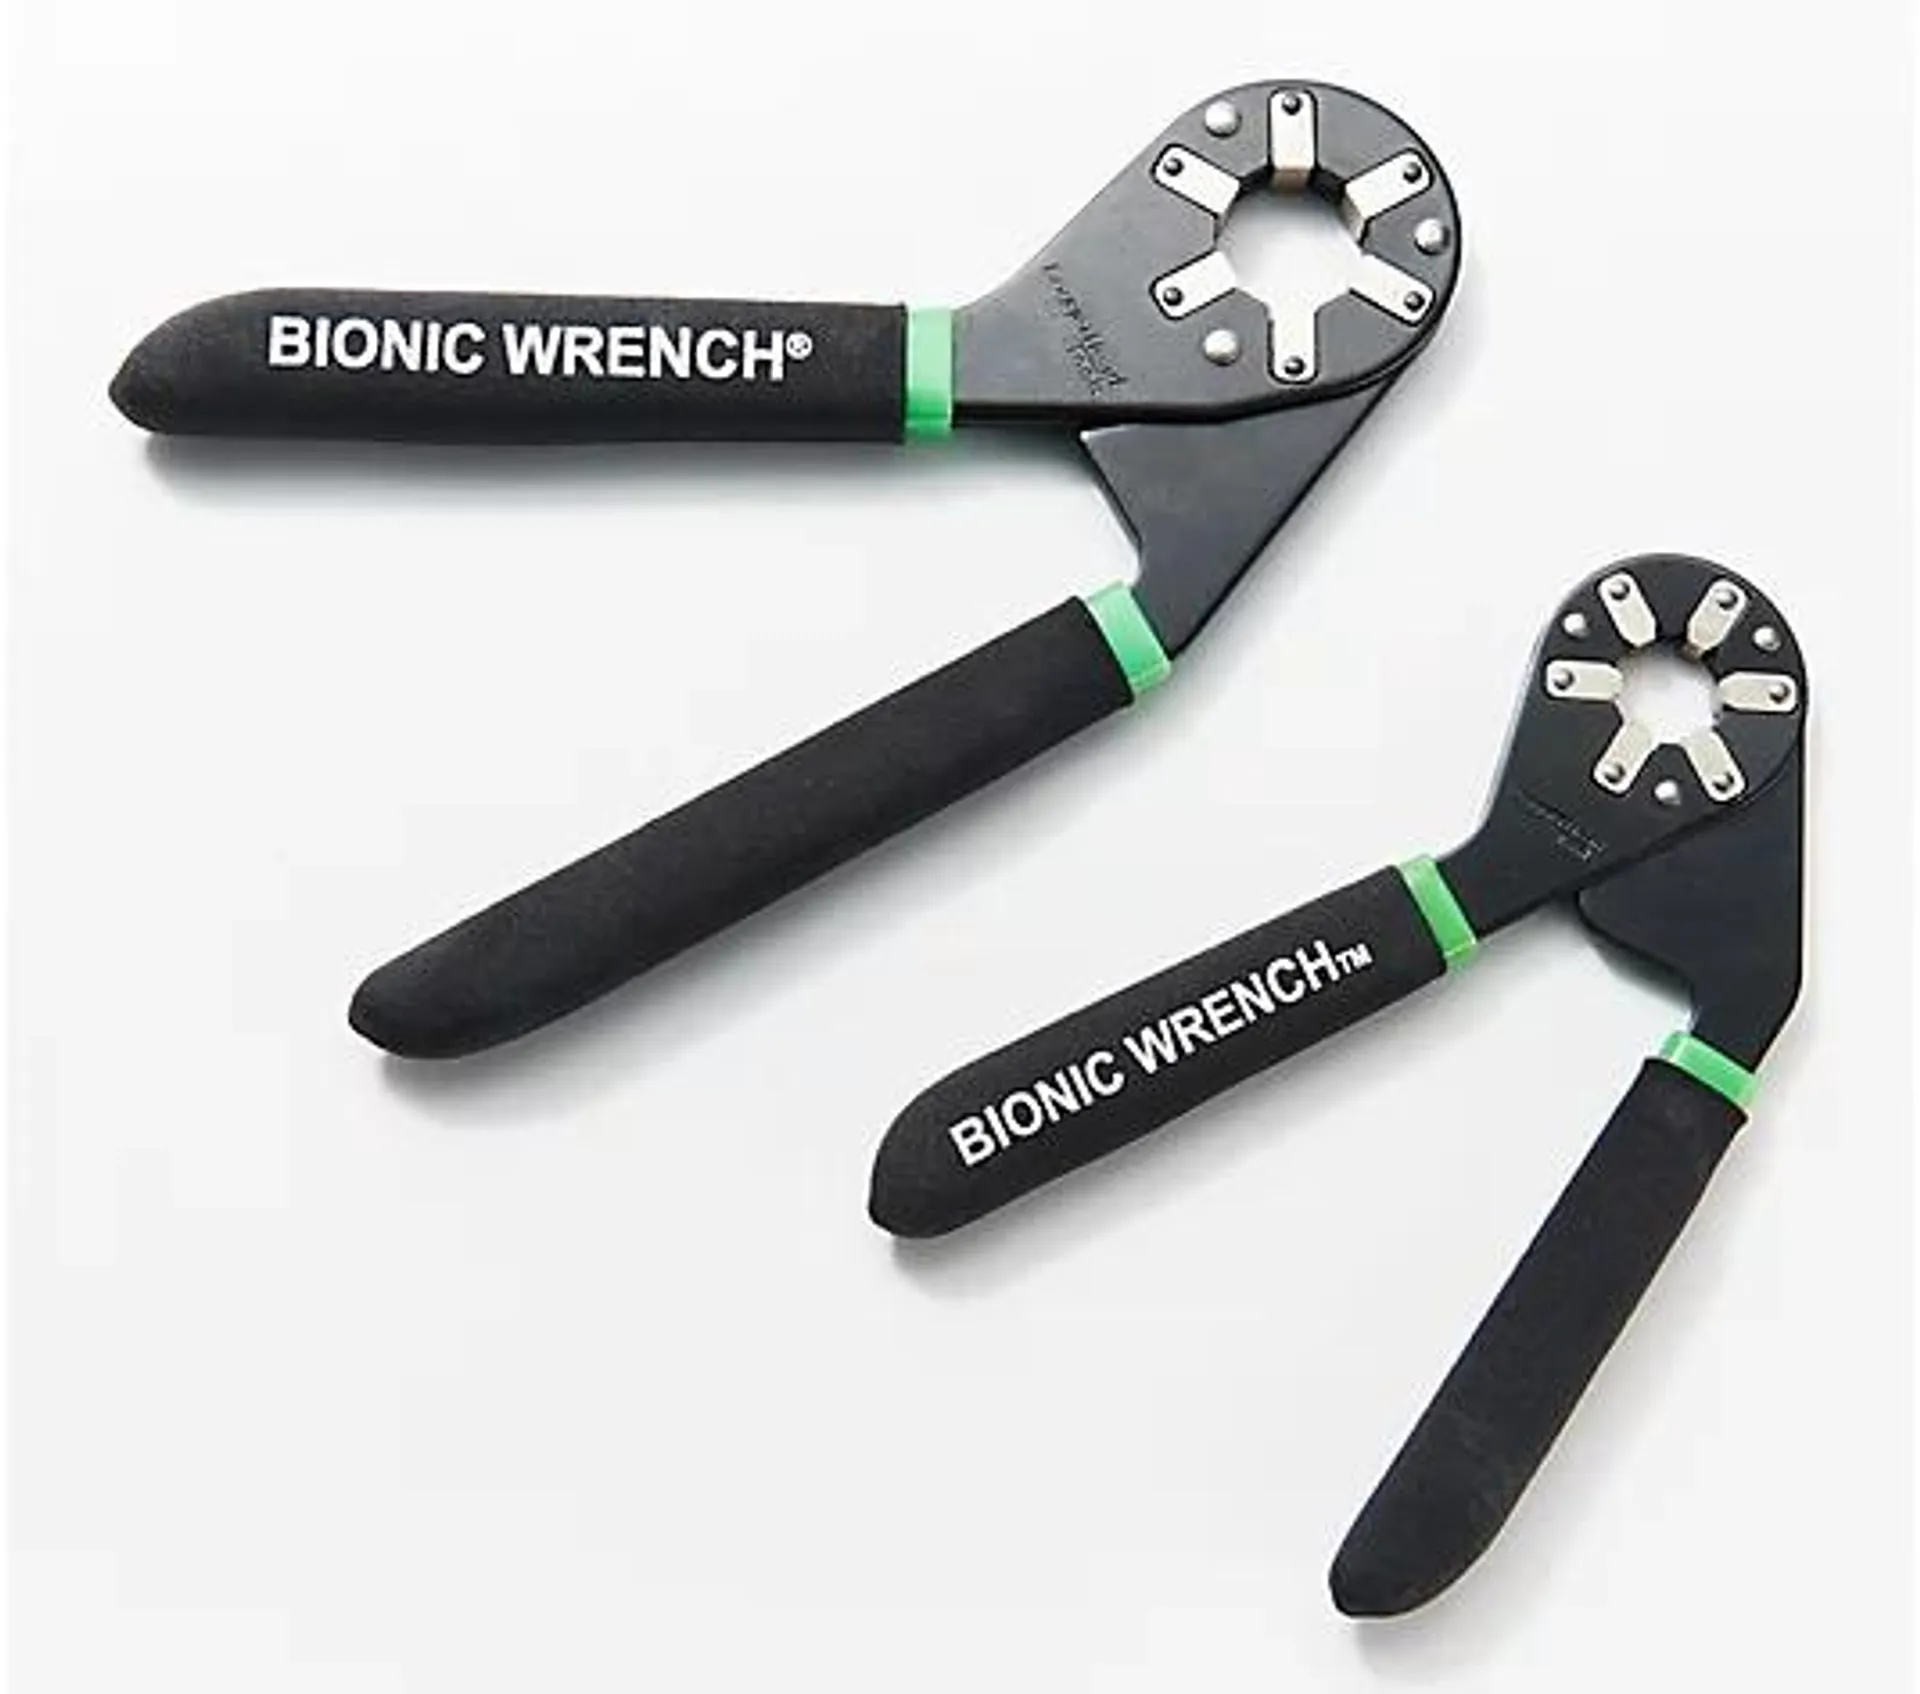 Bionic Wrench 14-in-1 Self Adjusting 8" & 6" Hybrid Wrench Set